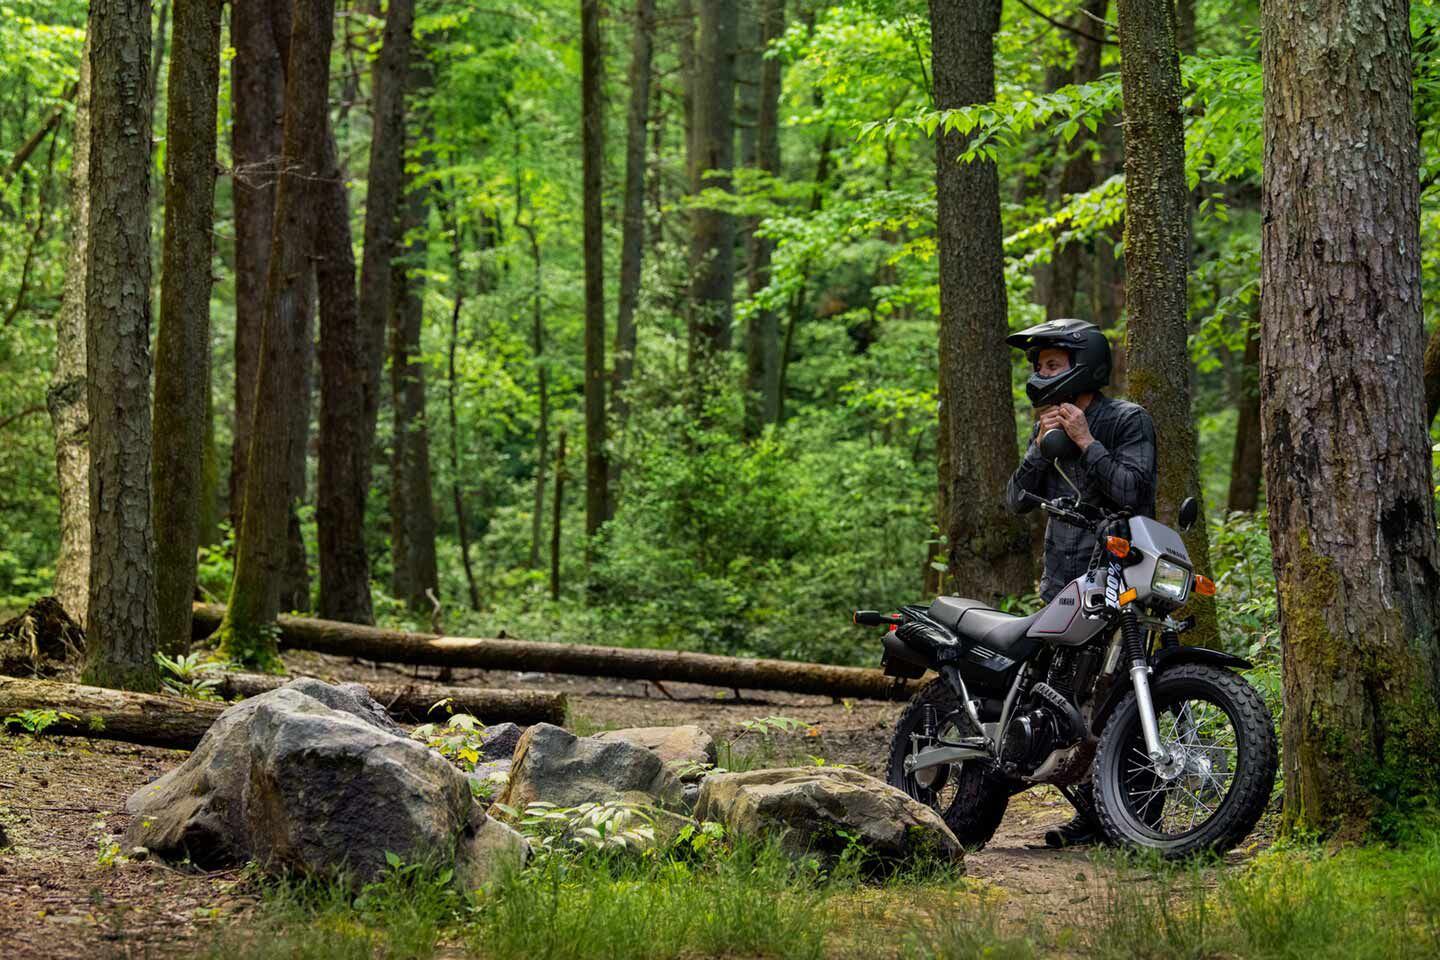 This approachable dual sport has been a rider favorite for years.